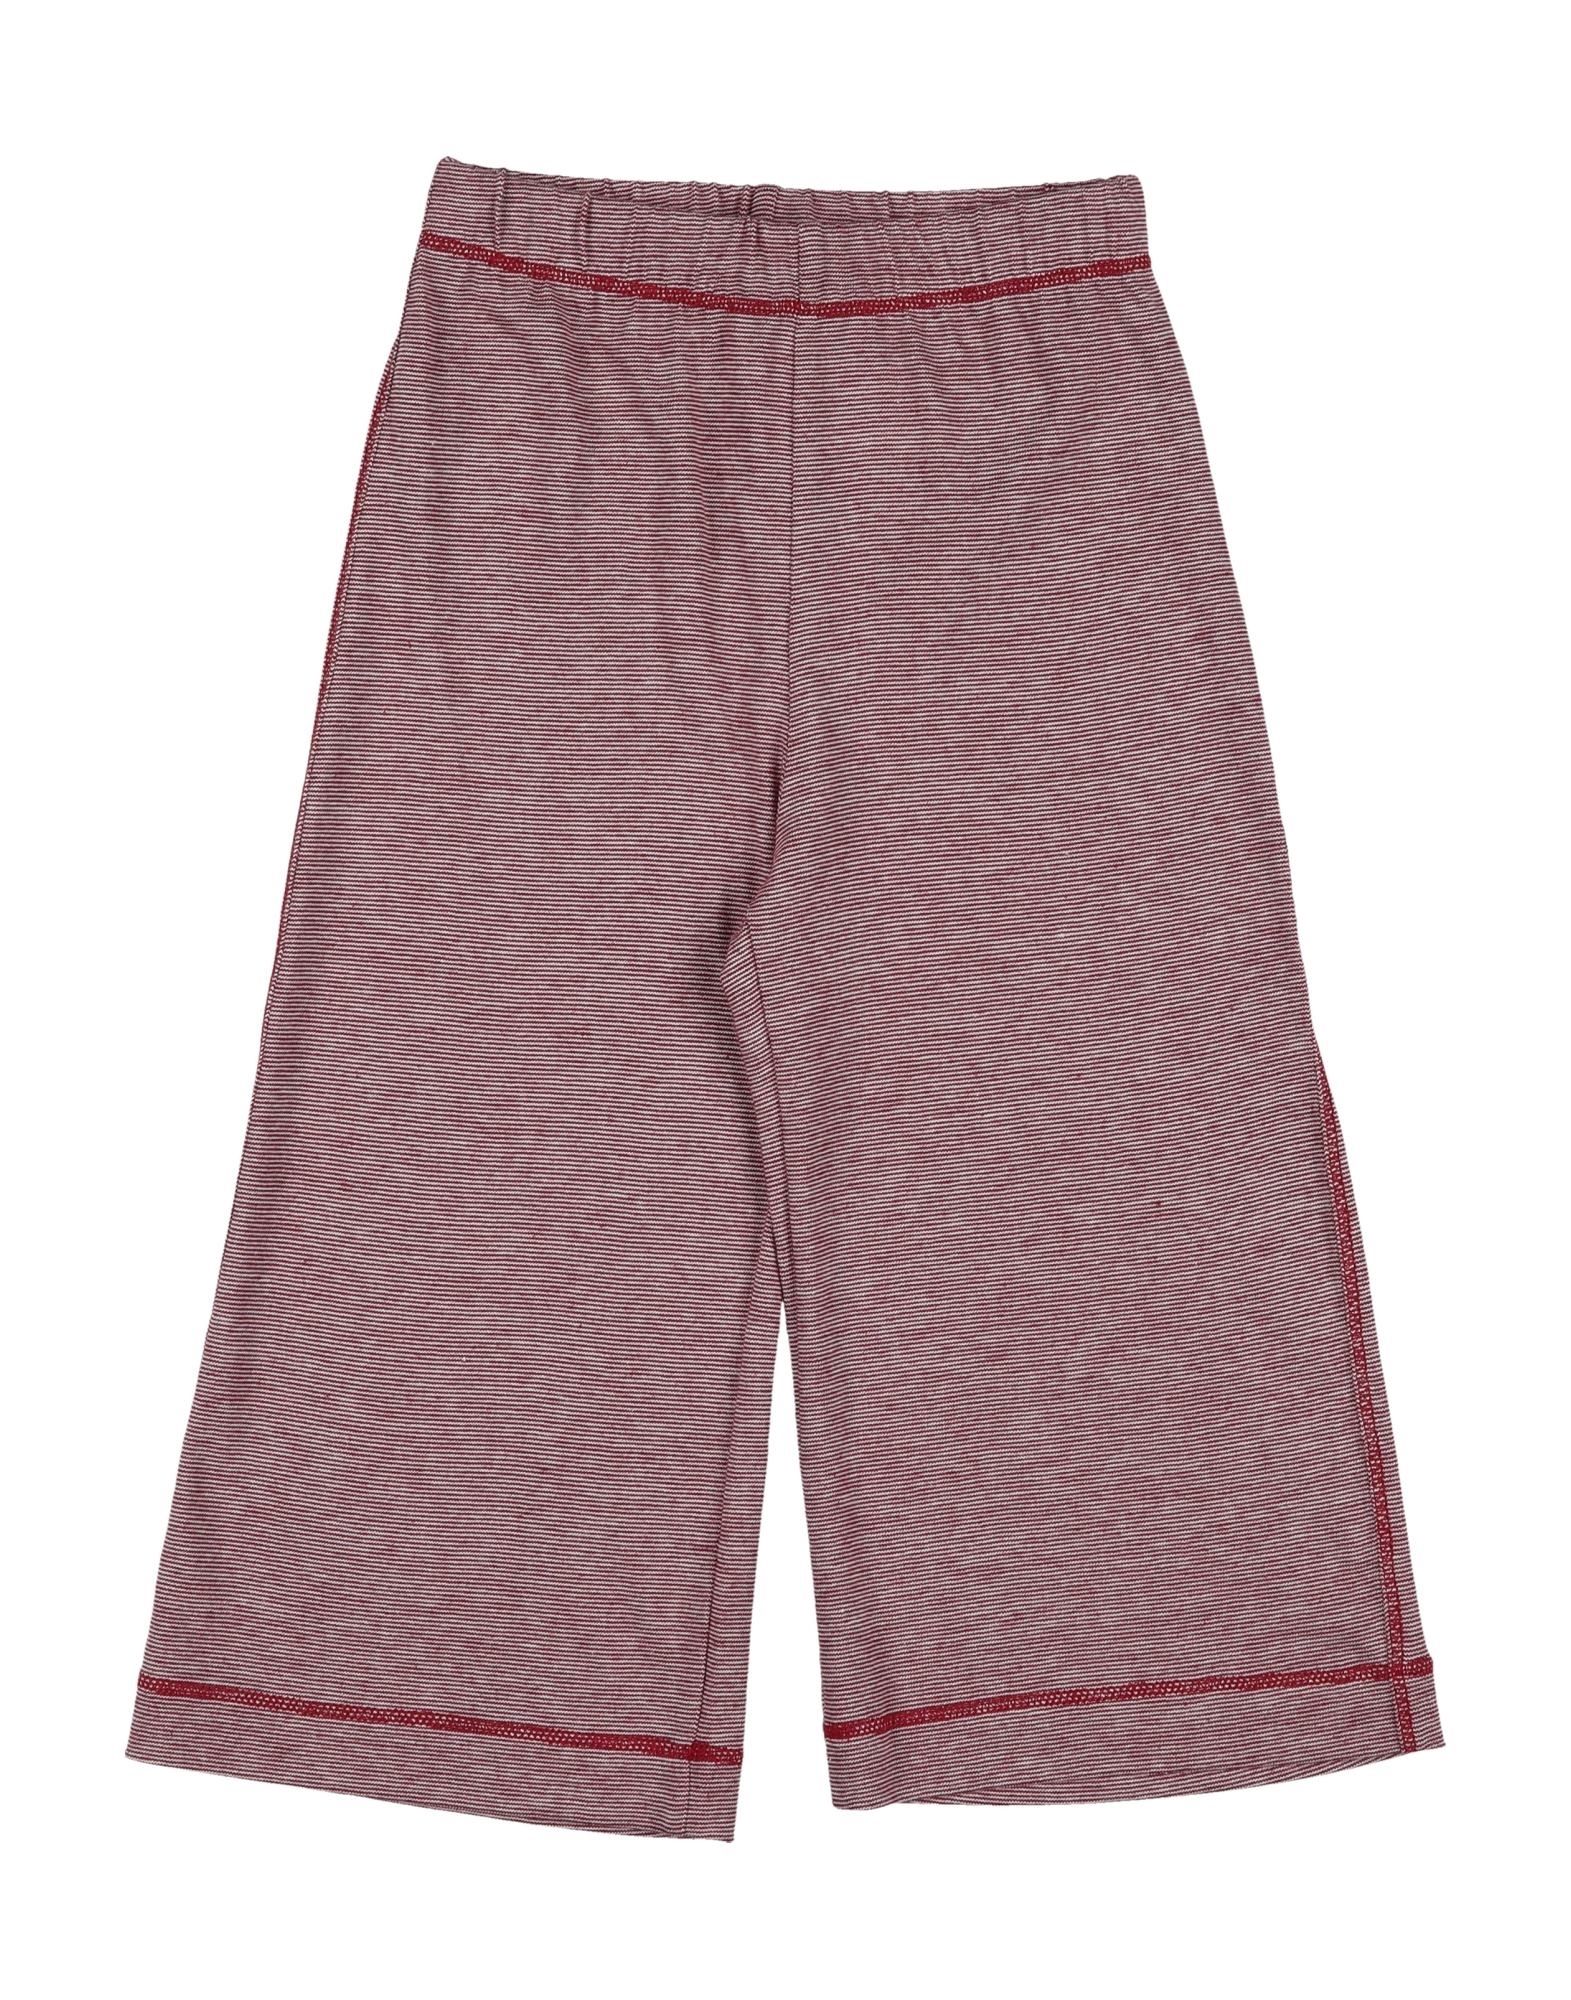 Caffe' D'orzo Kids' Pants In Red